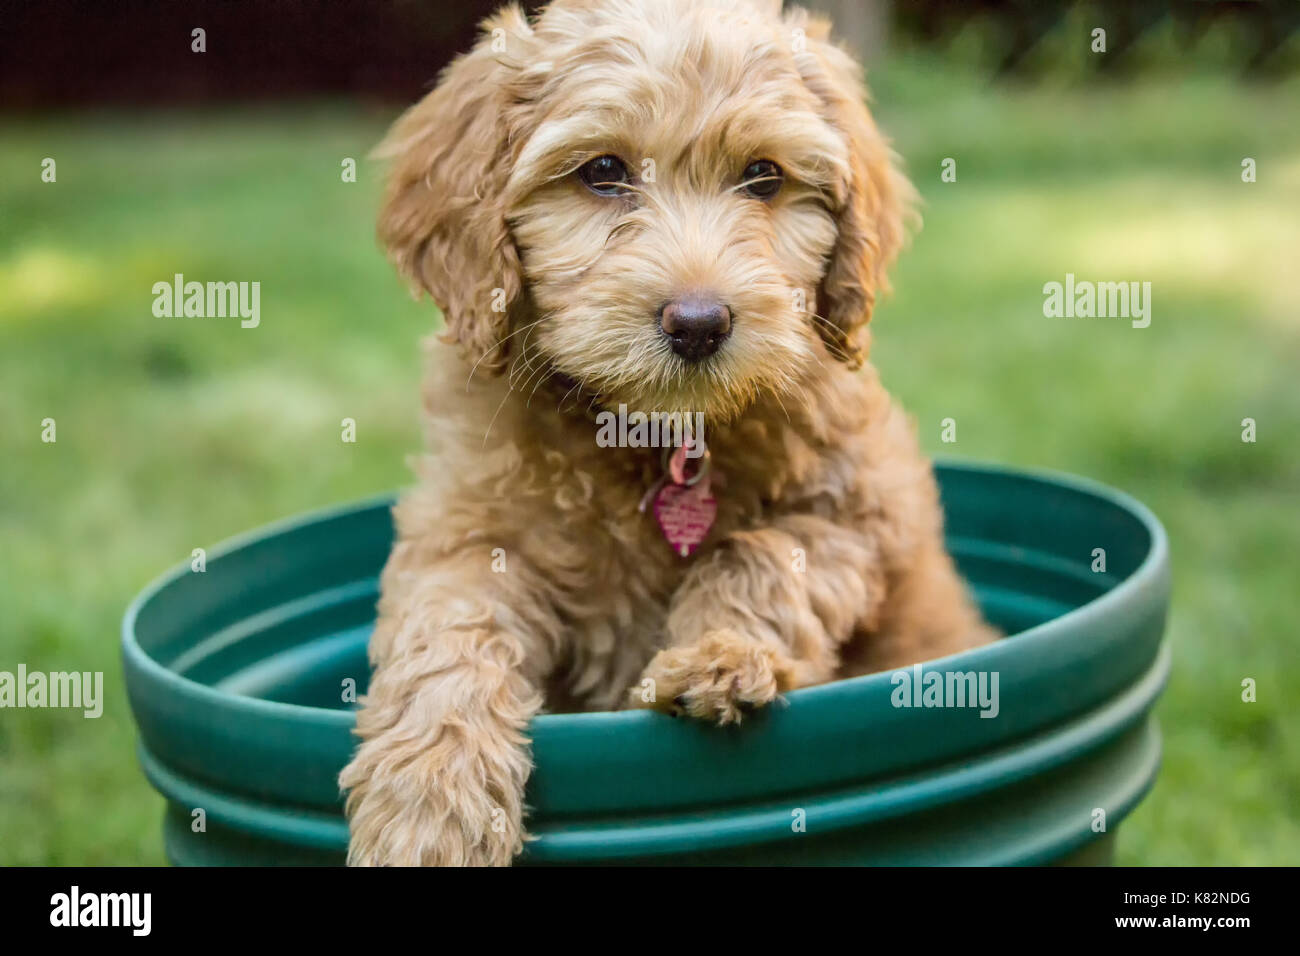 Eight week old Goldendoodle puppy 'Bella' sitting inside an empty flower pot, unsure how to get out, in Issaquah, Washington, USA Stock Photo